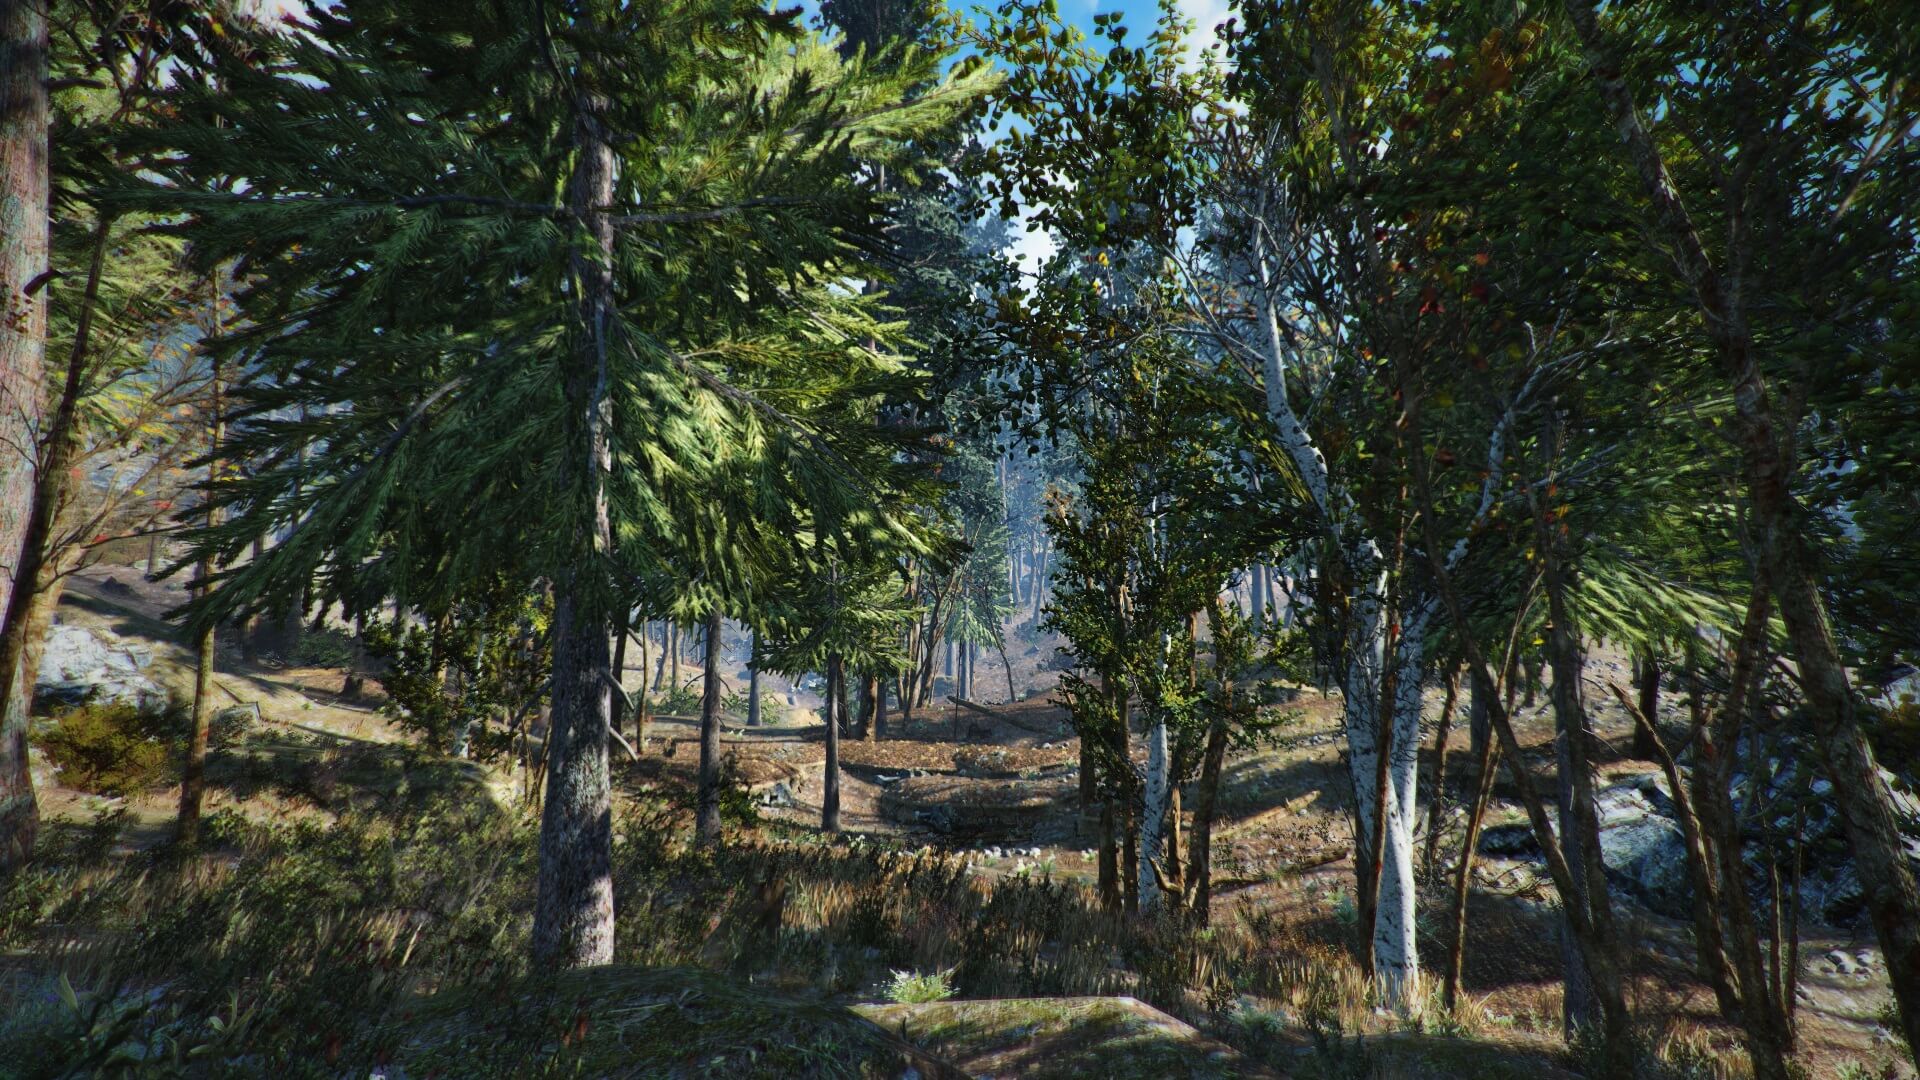 This 1.1GB Texture Pack for Fallout 4 adds 10 trees